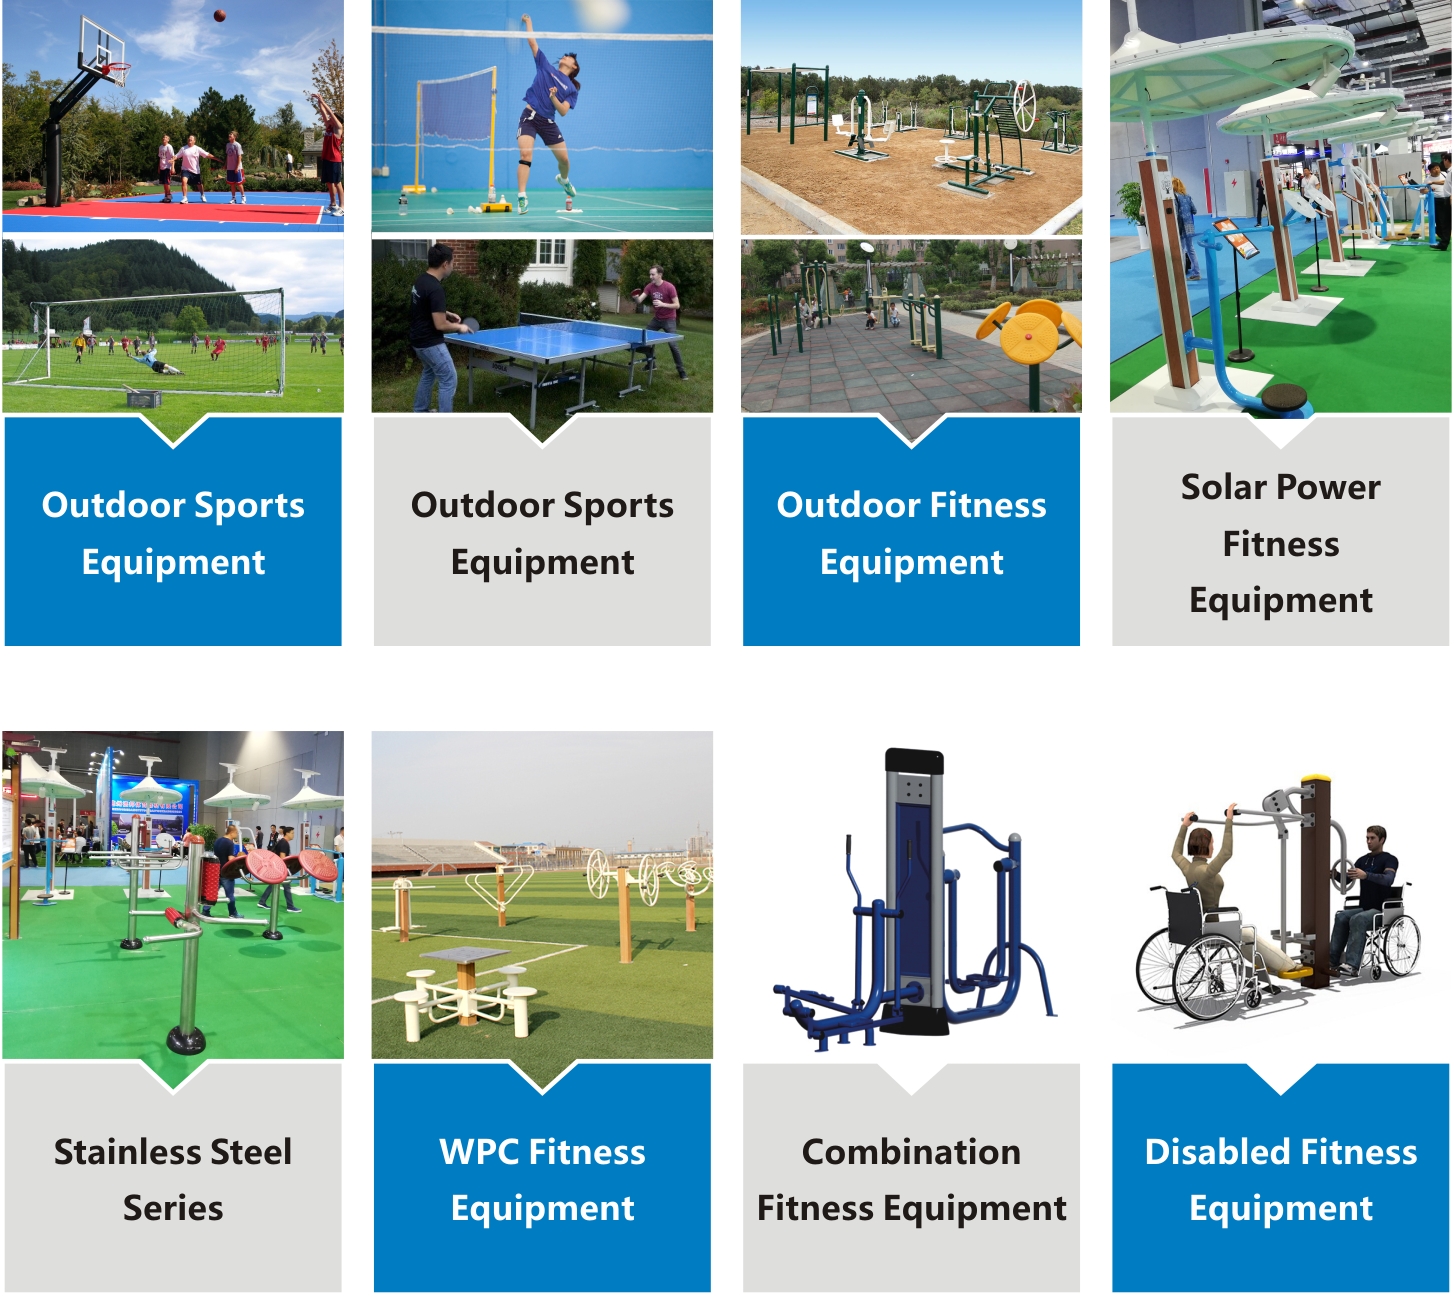 Four Recommendations for Maintenance of Outdoor Fitness Equipment